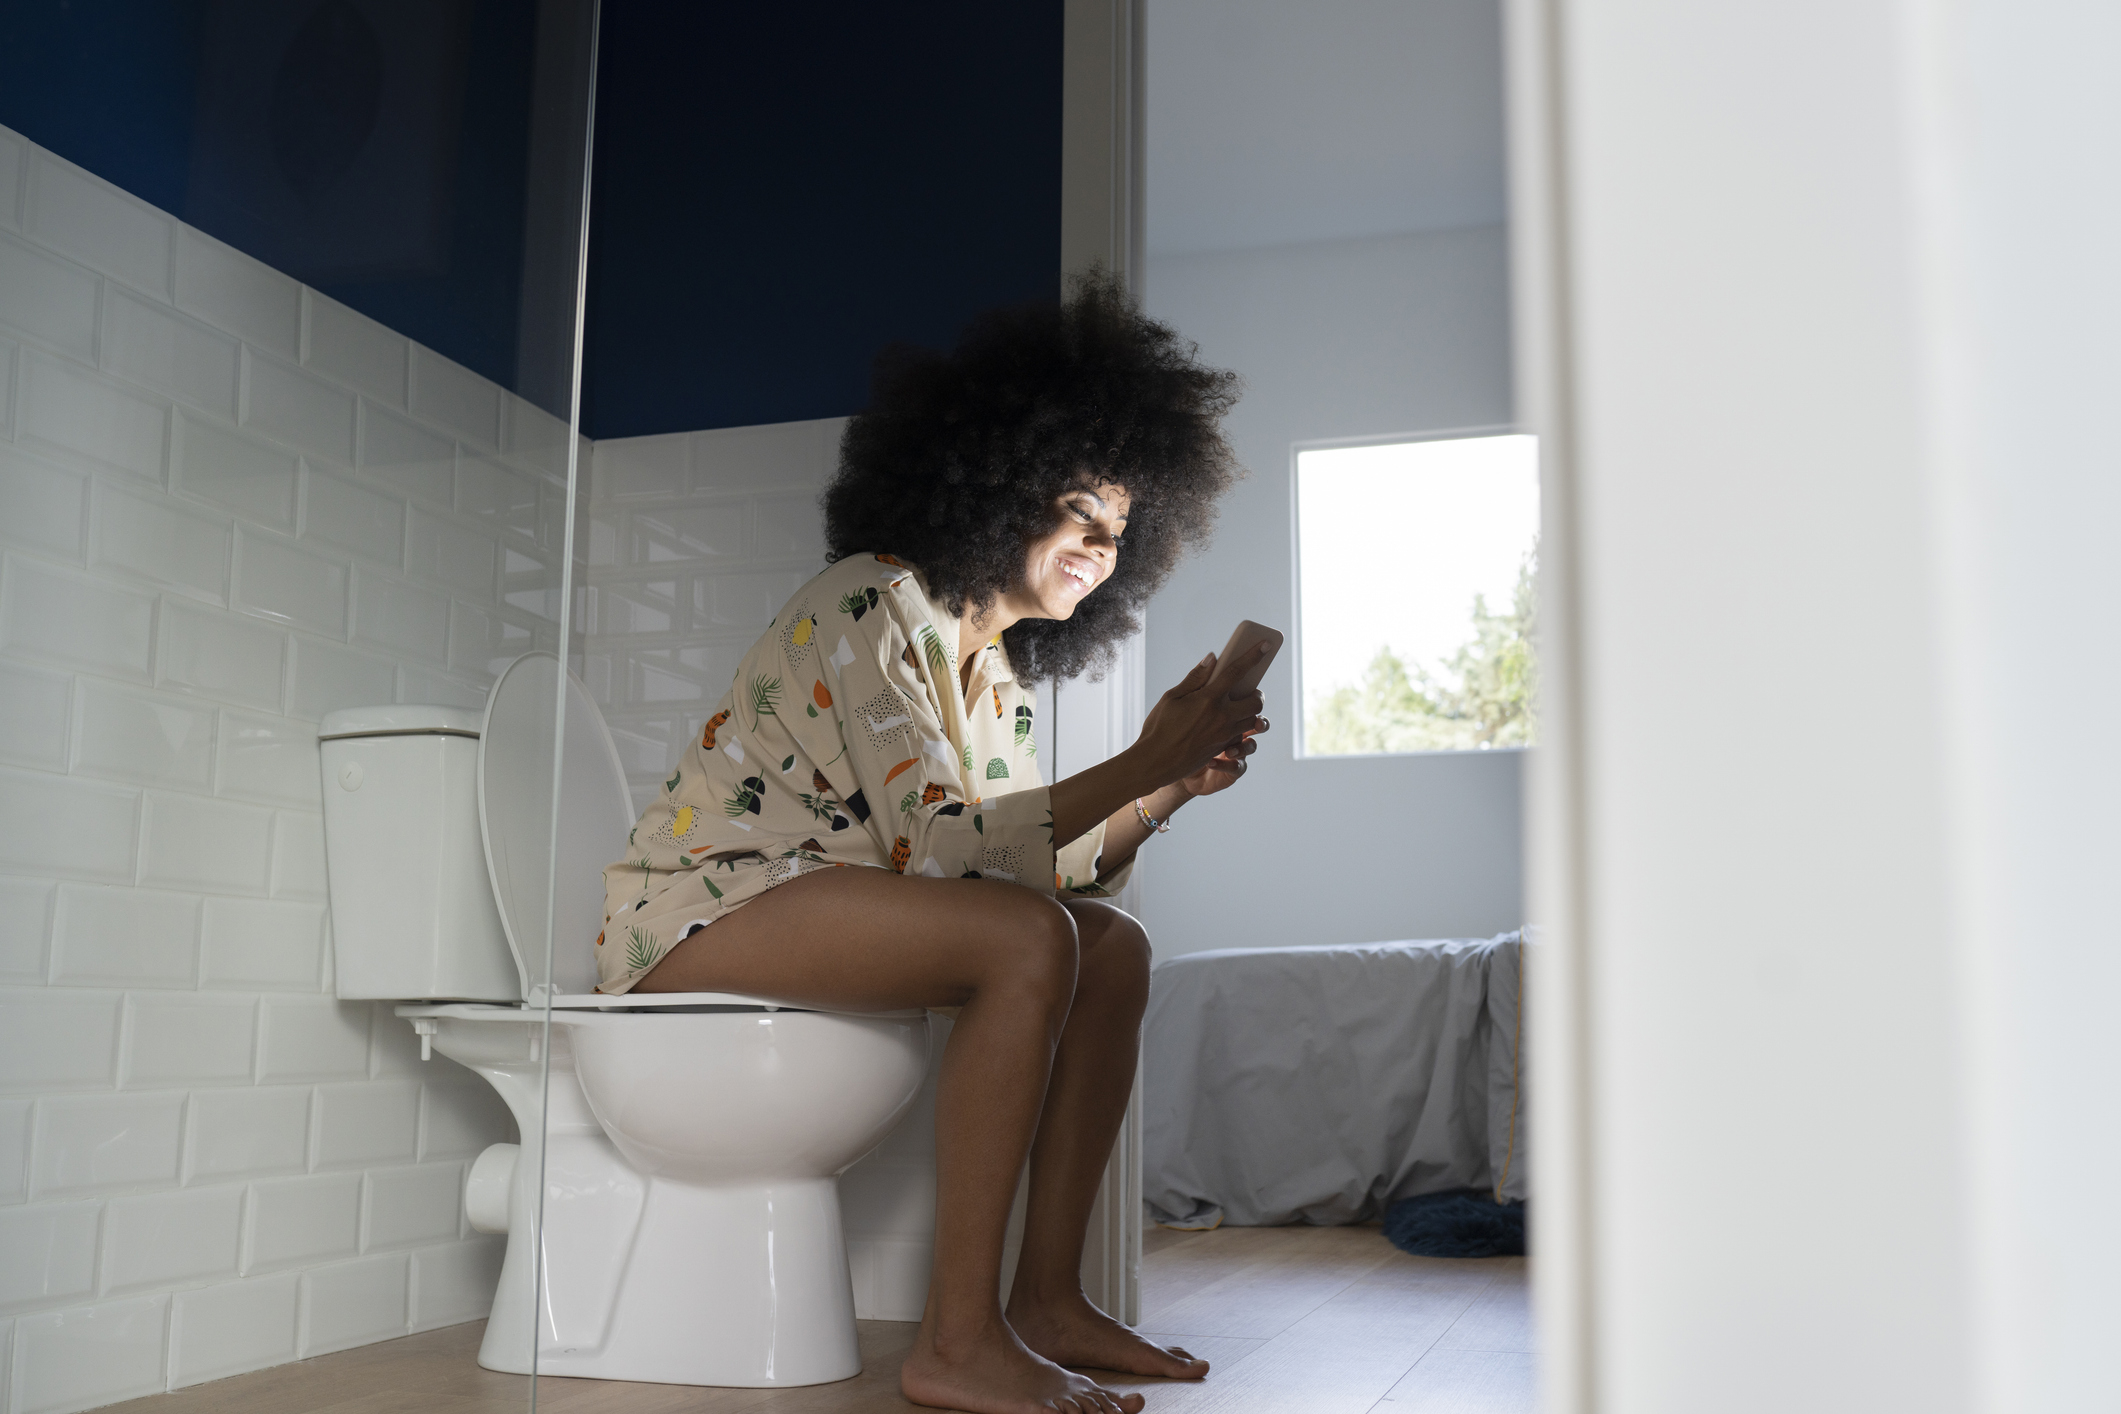 Person sits on a toilet, smiling while looking at a phone. They are wearing patterned loungewear. The bathroom has a window providing natural light